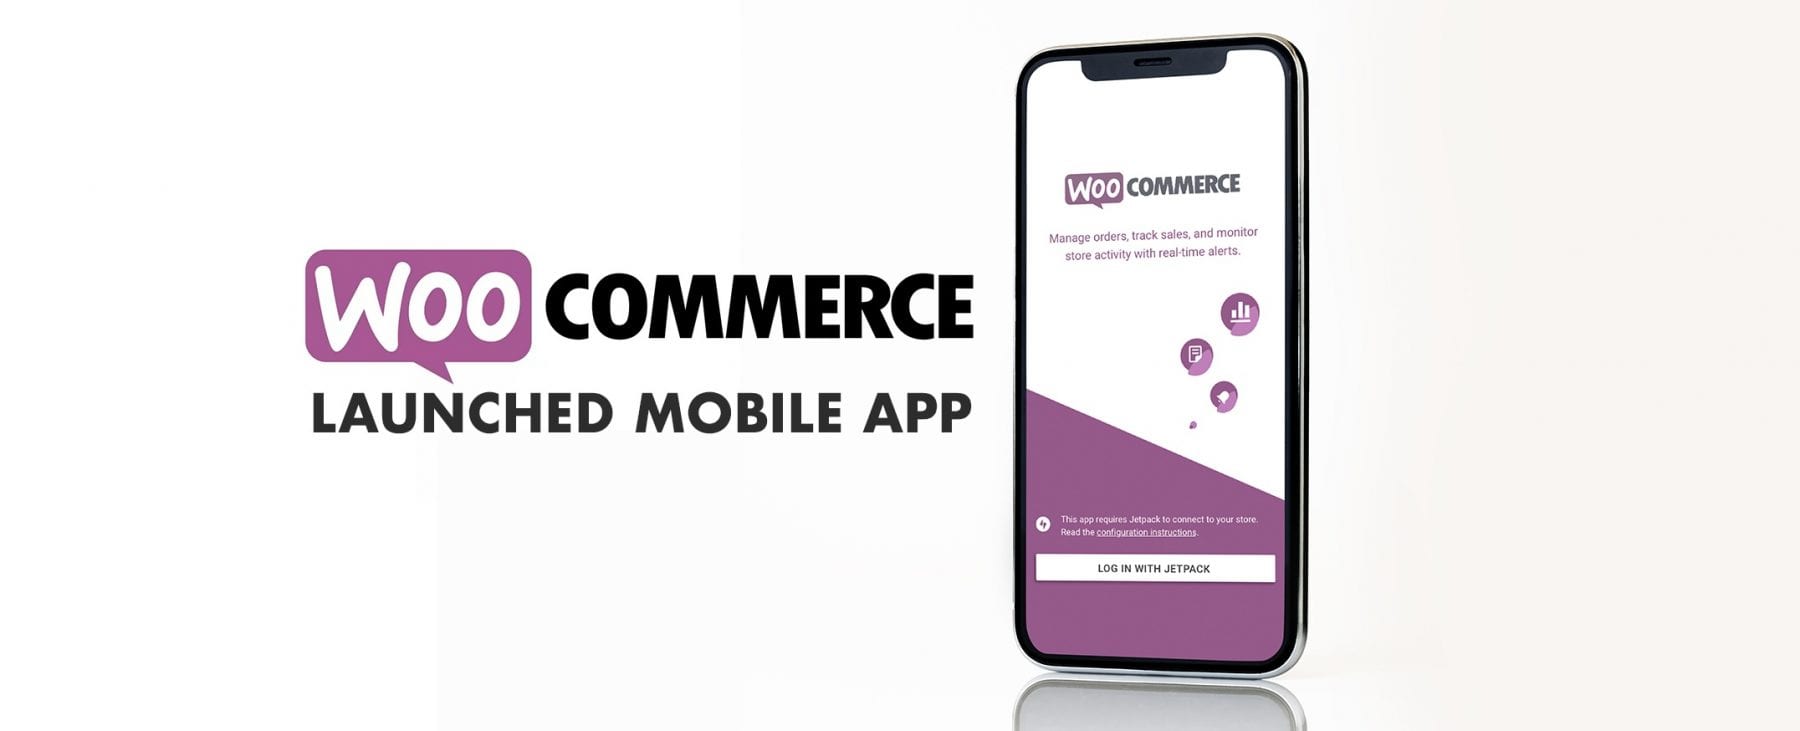 WooCommerce-launched-mobile-app